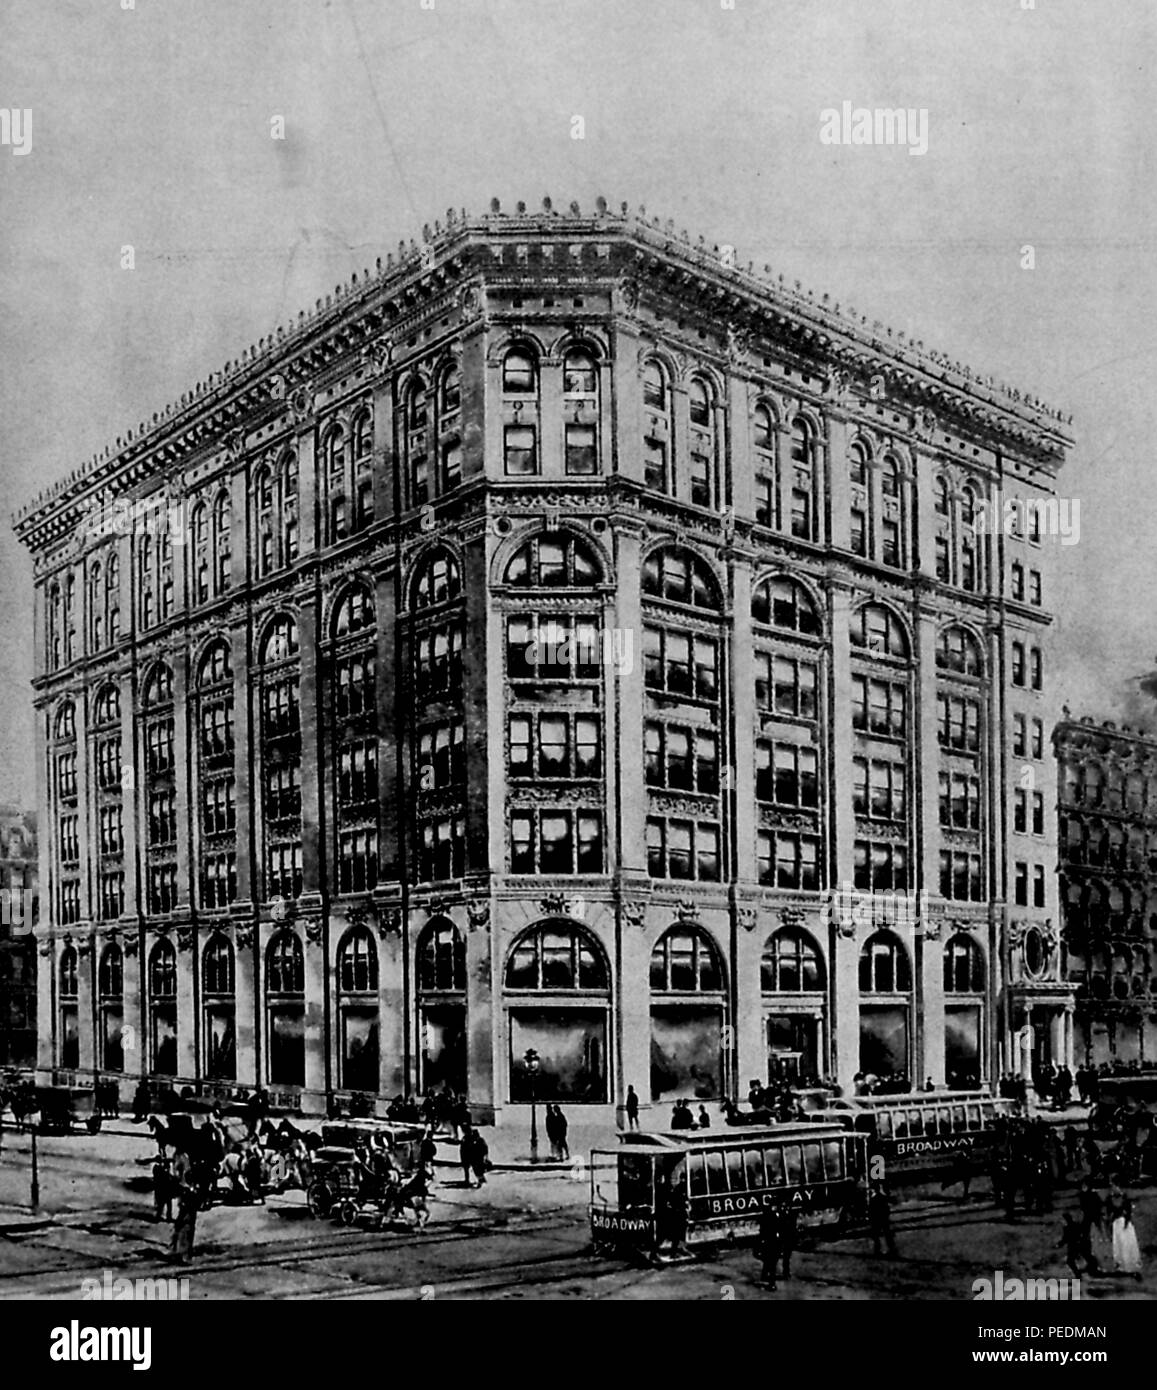 Black and white image depicting the classical revival facade of the Broadway Cable Railroad Company power station in New York, with trams and pedestrians in the foreground, from the volume 'Real Estate Record and Builders' Guide, ' published in New York by FW Dodge Corp, 1888. Courtesy Internet Archive.  () Stock Photo